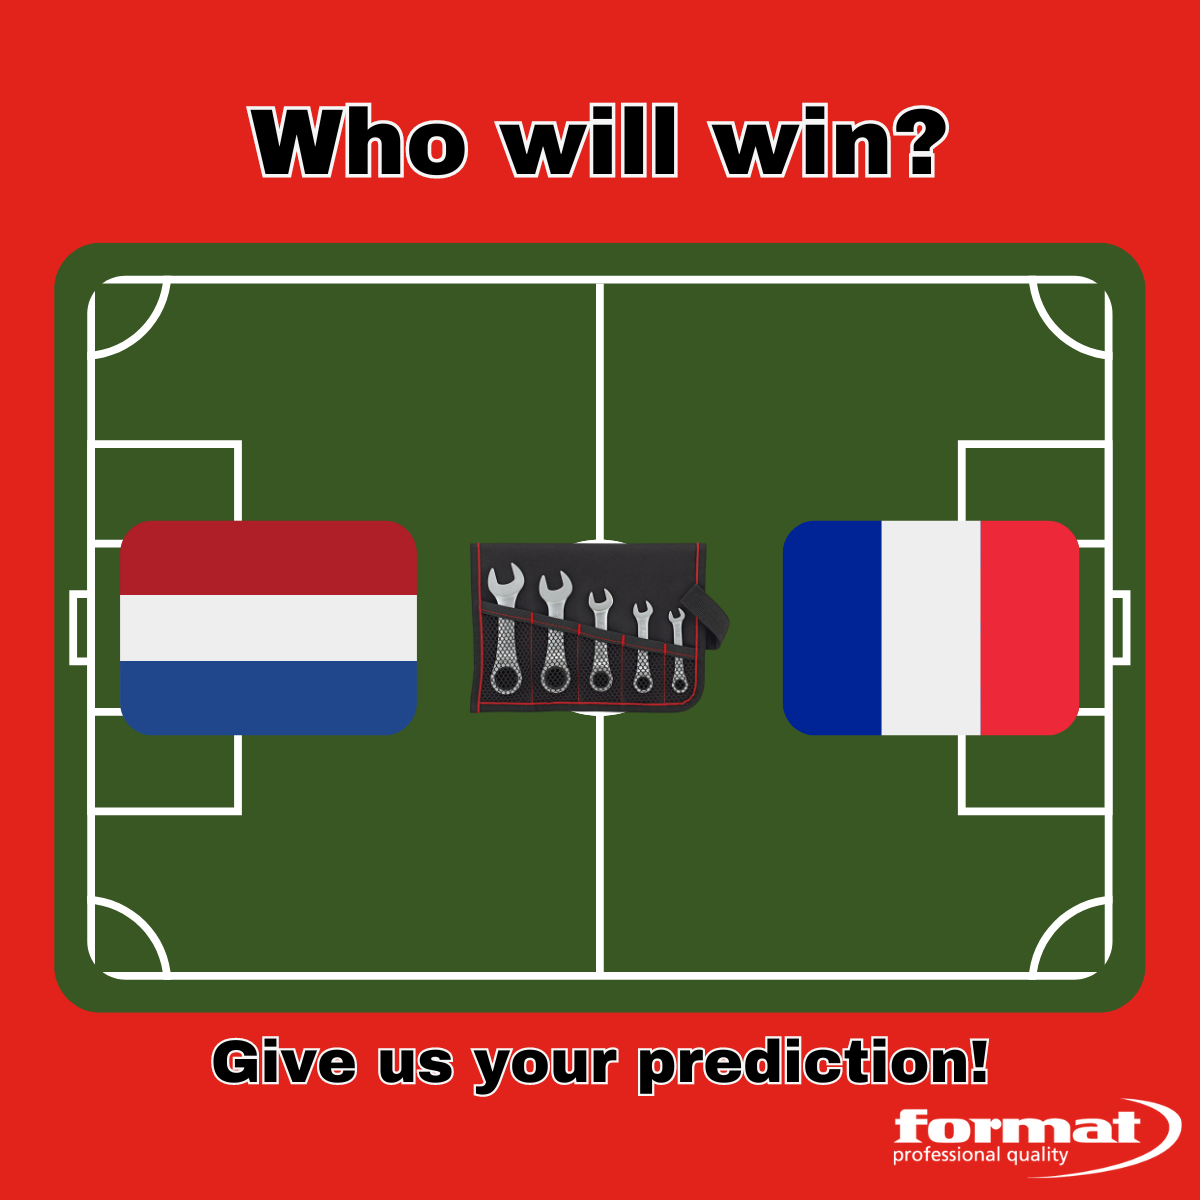 Who will win the match between the Netherlands and France?